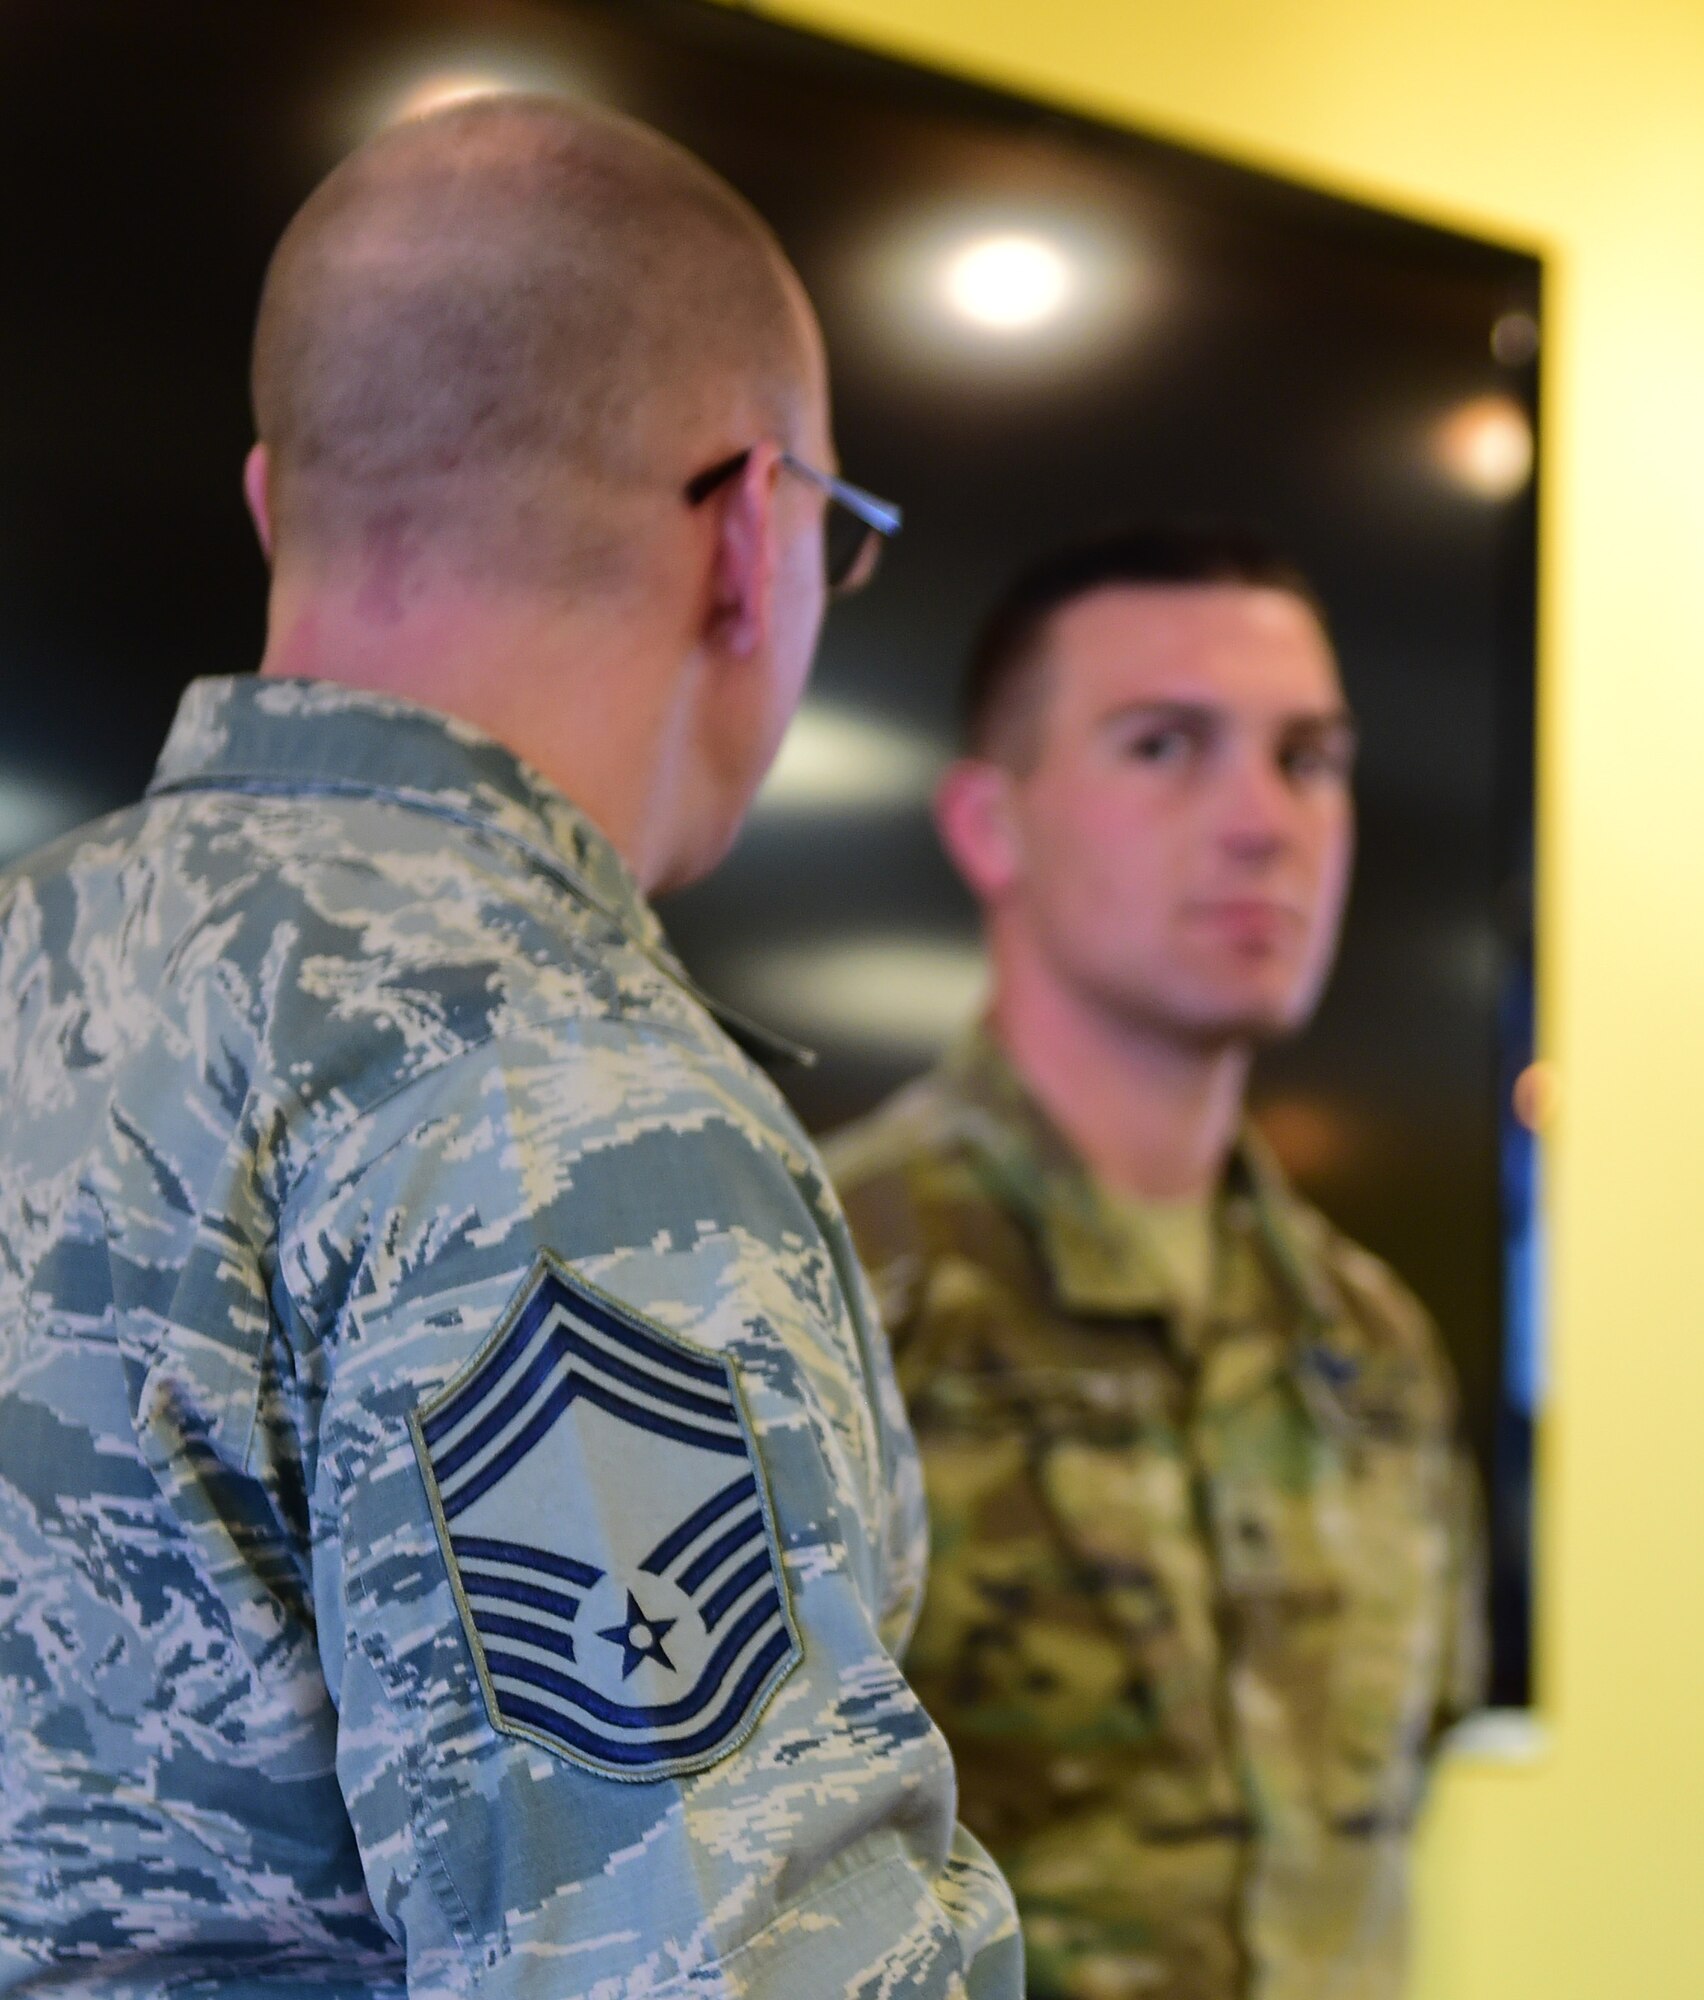 U.S. Air Force Chief Master Sgt. Richard Halseth, Team Buckley Chief’s Group member, speaks about the accomplishments of U.S. Army Spc. Brian Carter, 743d Military Intelligence Battalion analyst, at the Panther Den Feb. 18, 2016, on Buckley Air Force Base, Colo. The Chief’s Group recognized Carter for going above and beyond the call of duty. (U.S. Air Force photo by Senior Airman Racheal E. Watson/Released) 